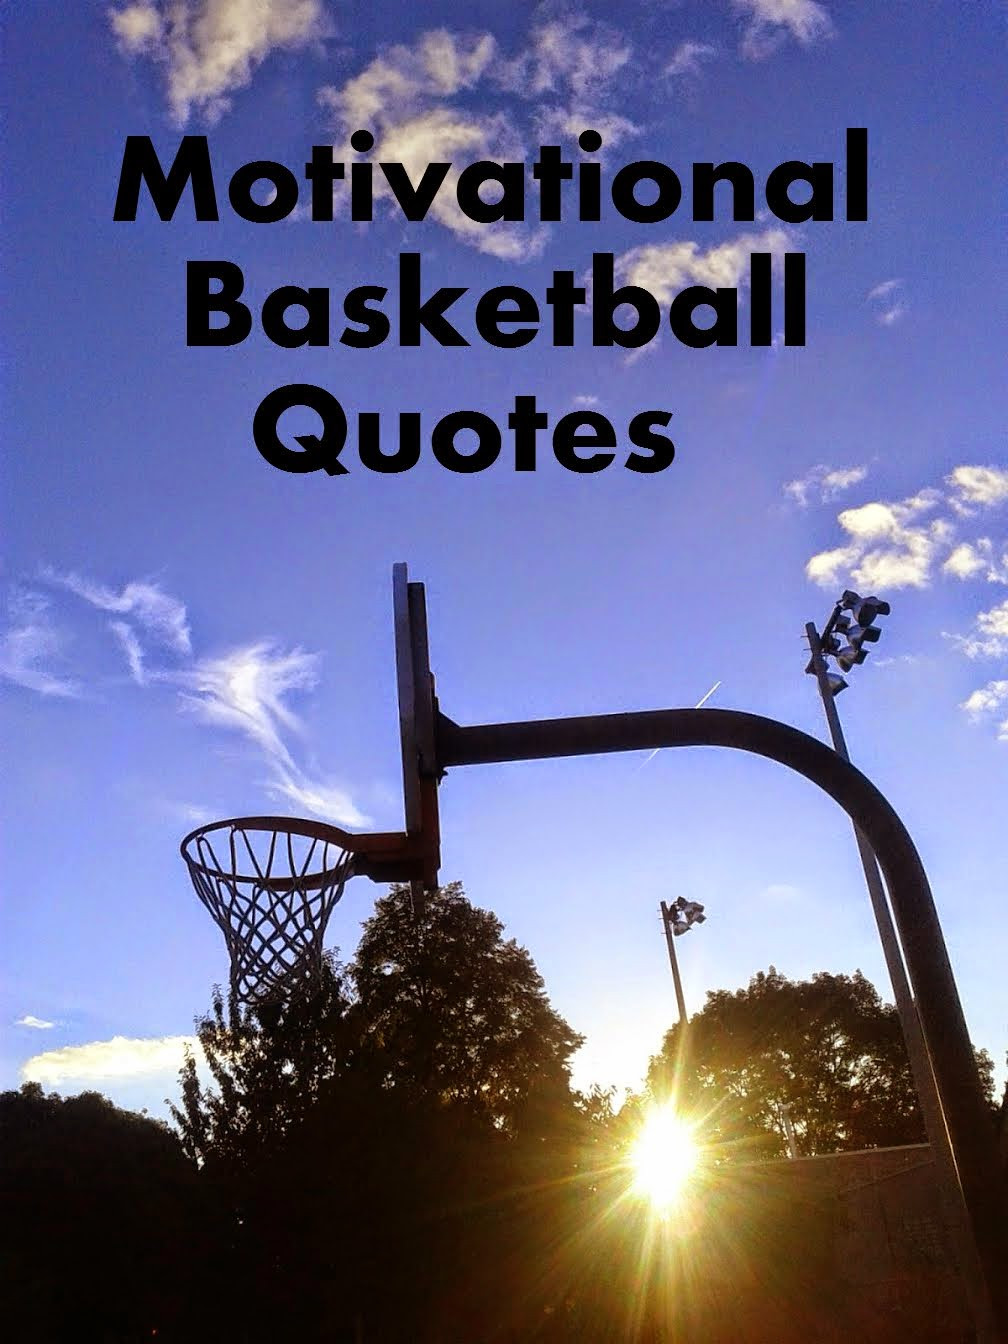 Basketball Motivational Quotes
 Motivational Quotes with many MMA & UFC